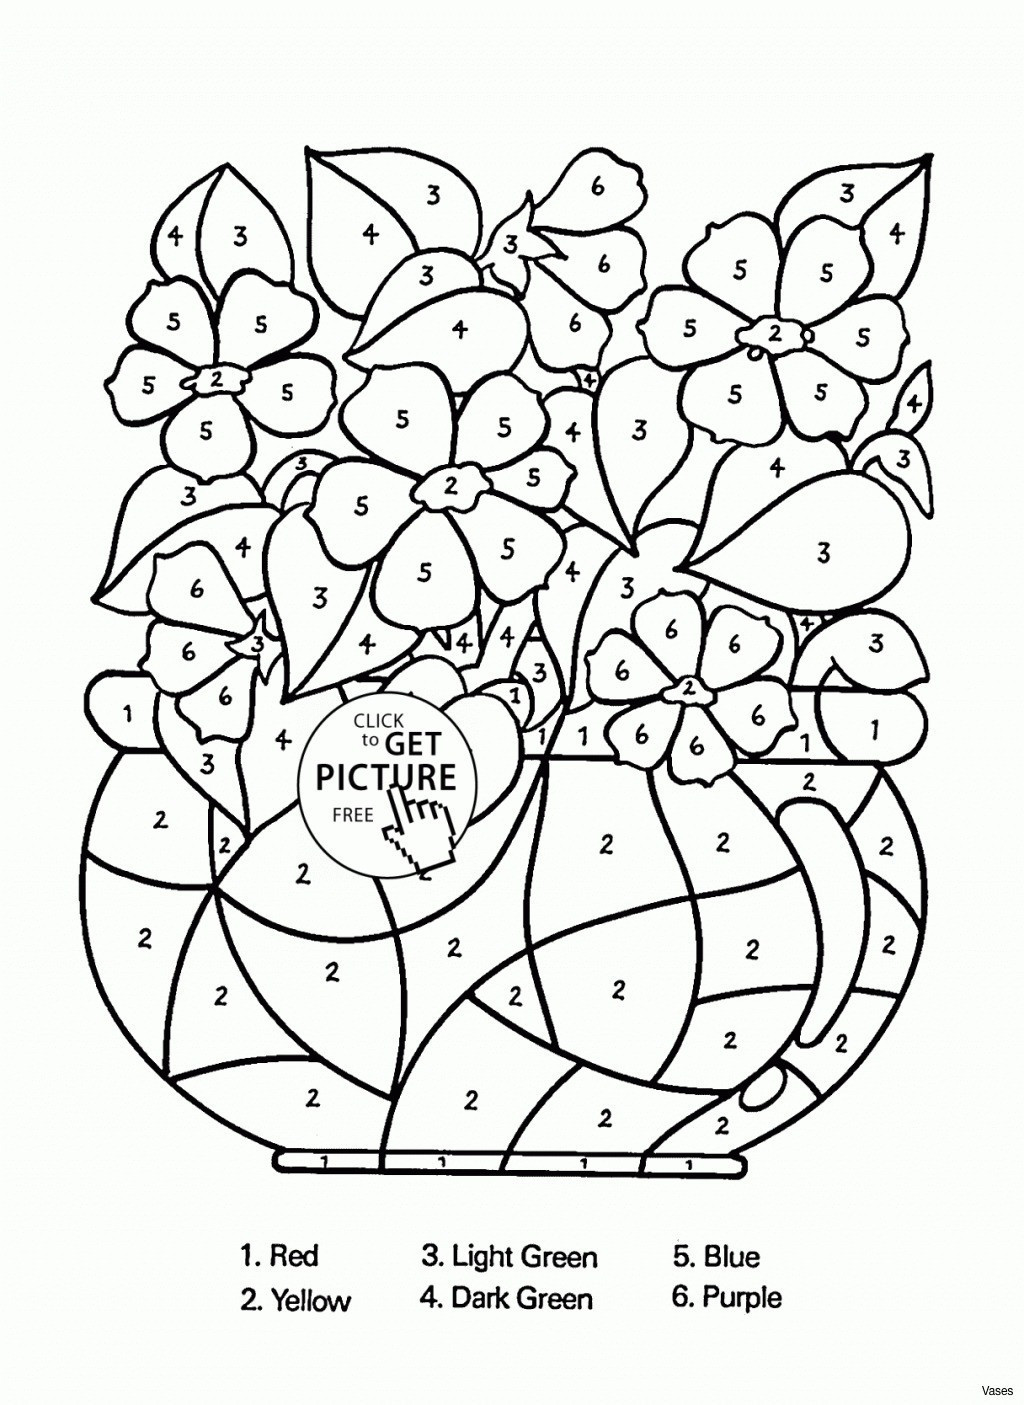 Flower Frog Vase Of tokidoki Coloring Pages 18inspirational Flower Coloring Books Intended for tokidoki Coloring Pages 18inspirational Flower Coloring Books Cliptokidoki Coloring Book